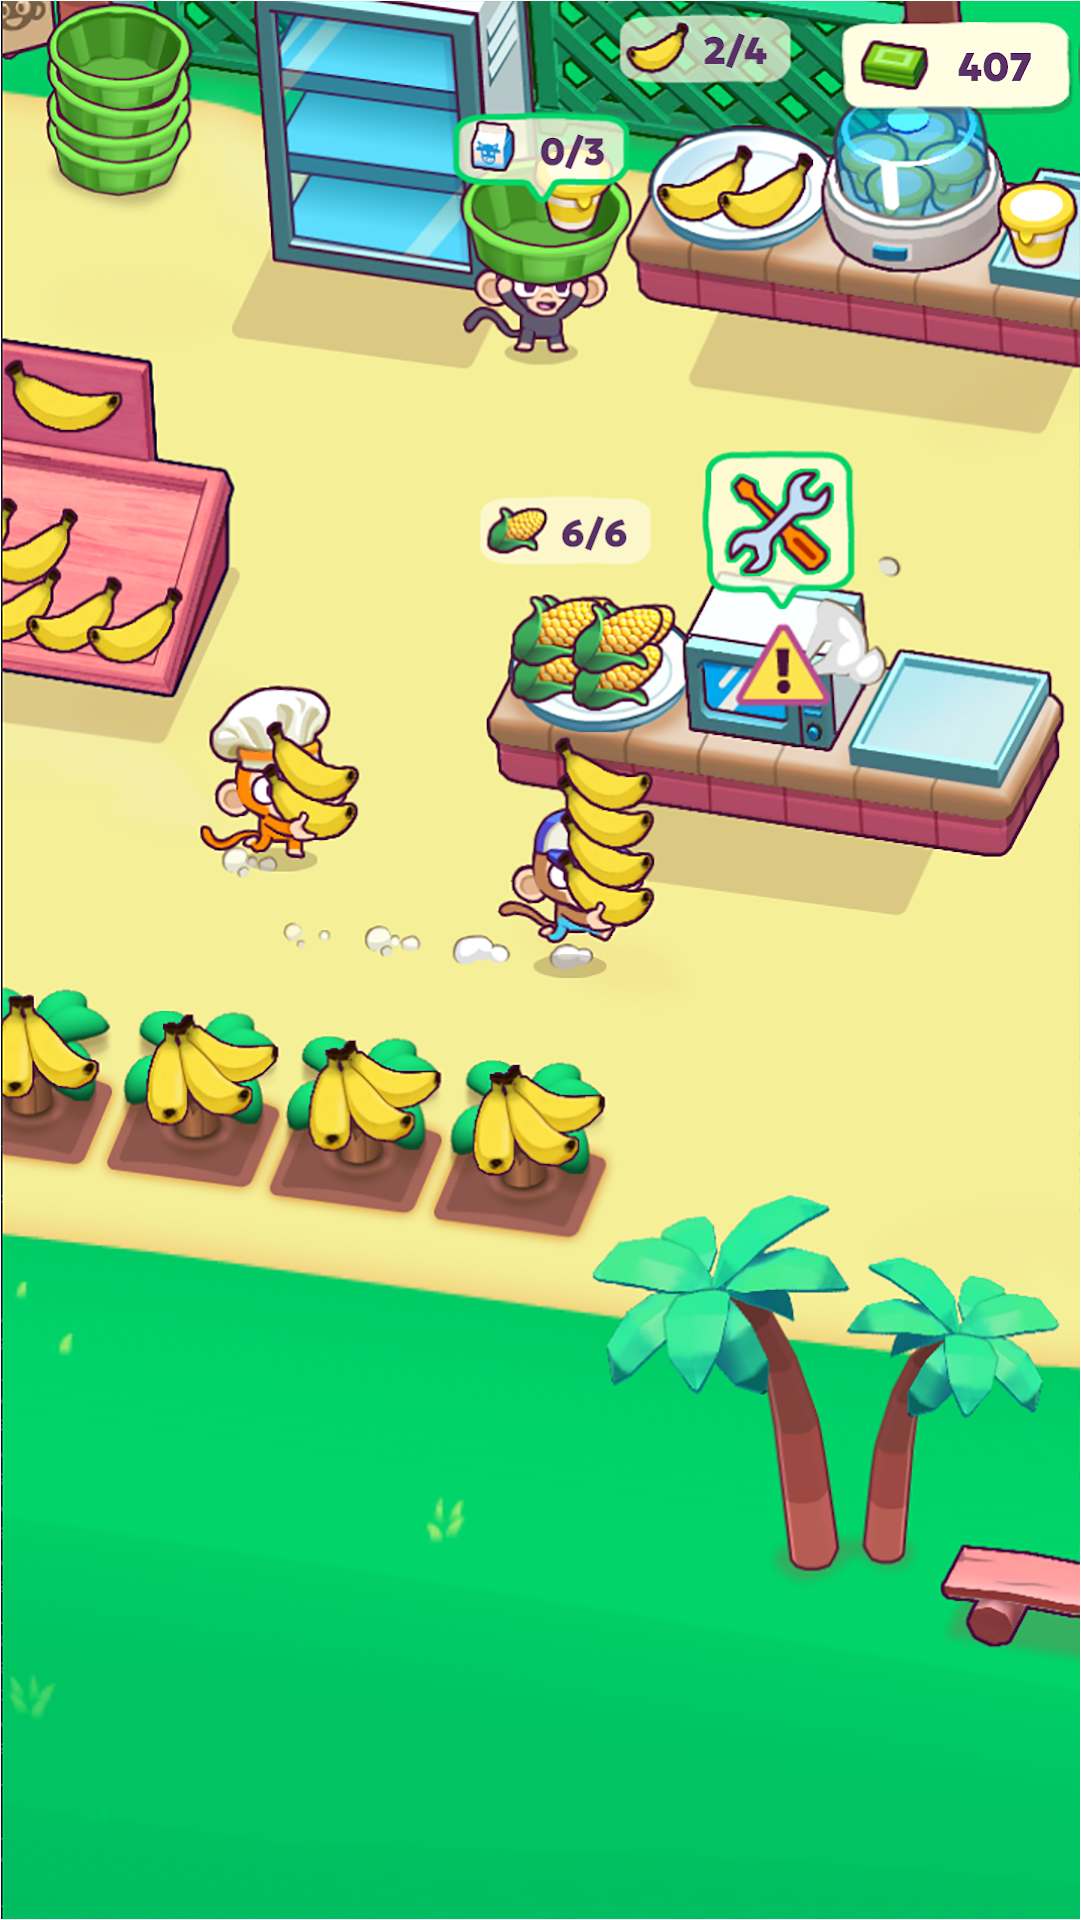 Monkey Mart: on-line APK (Android Game) - Free Download